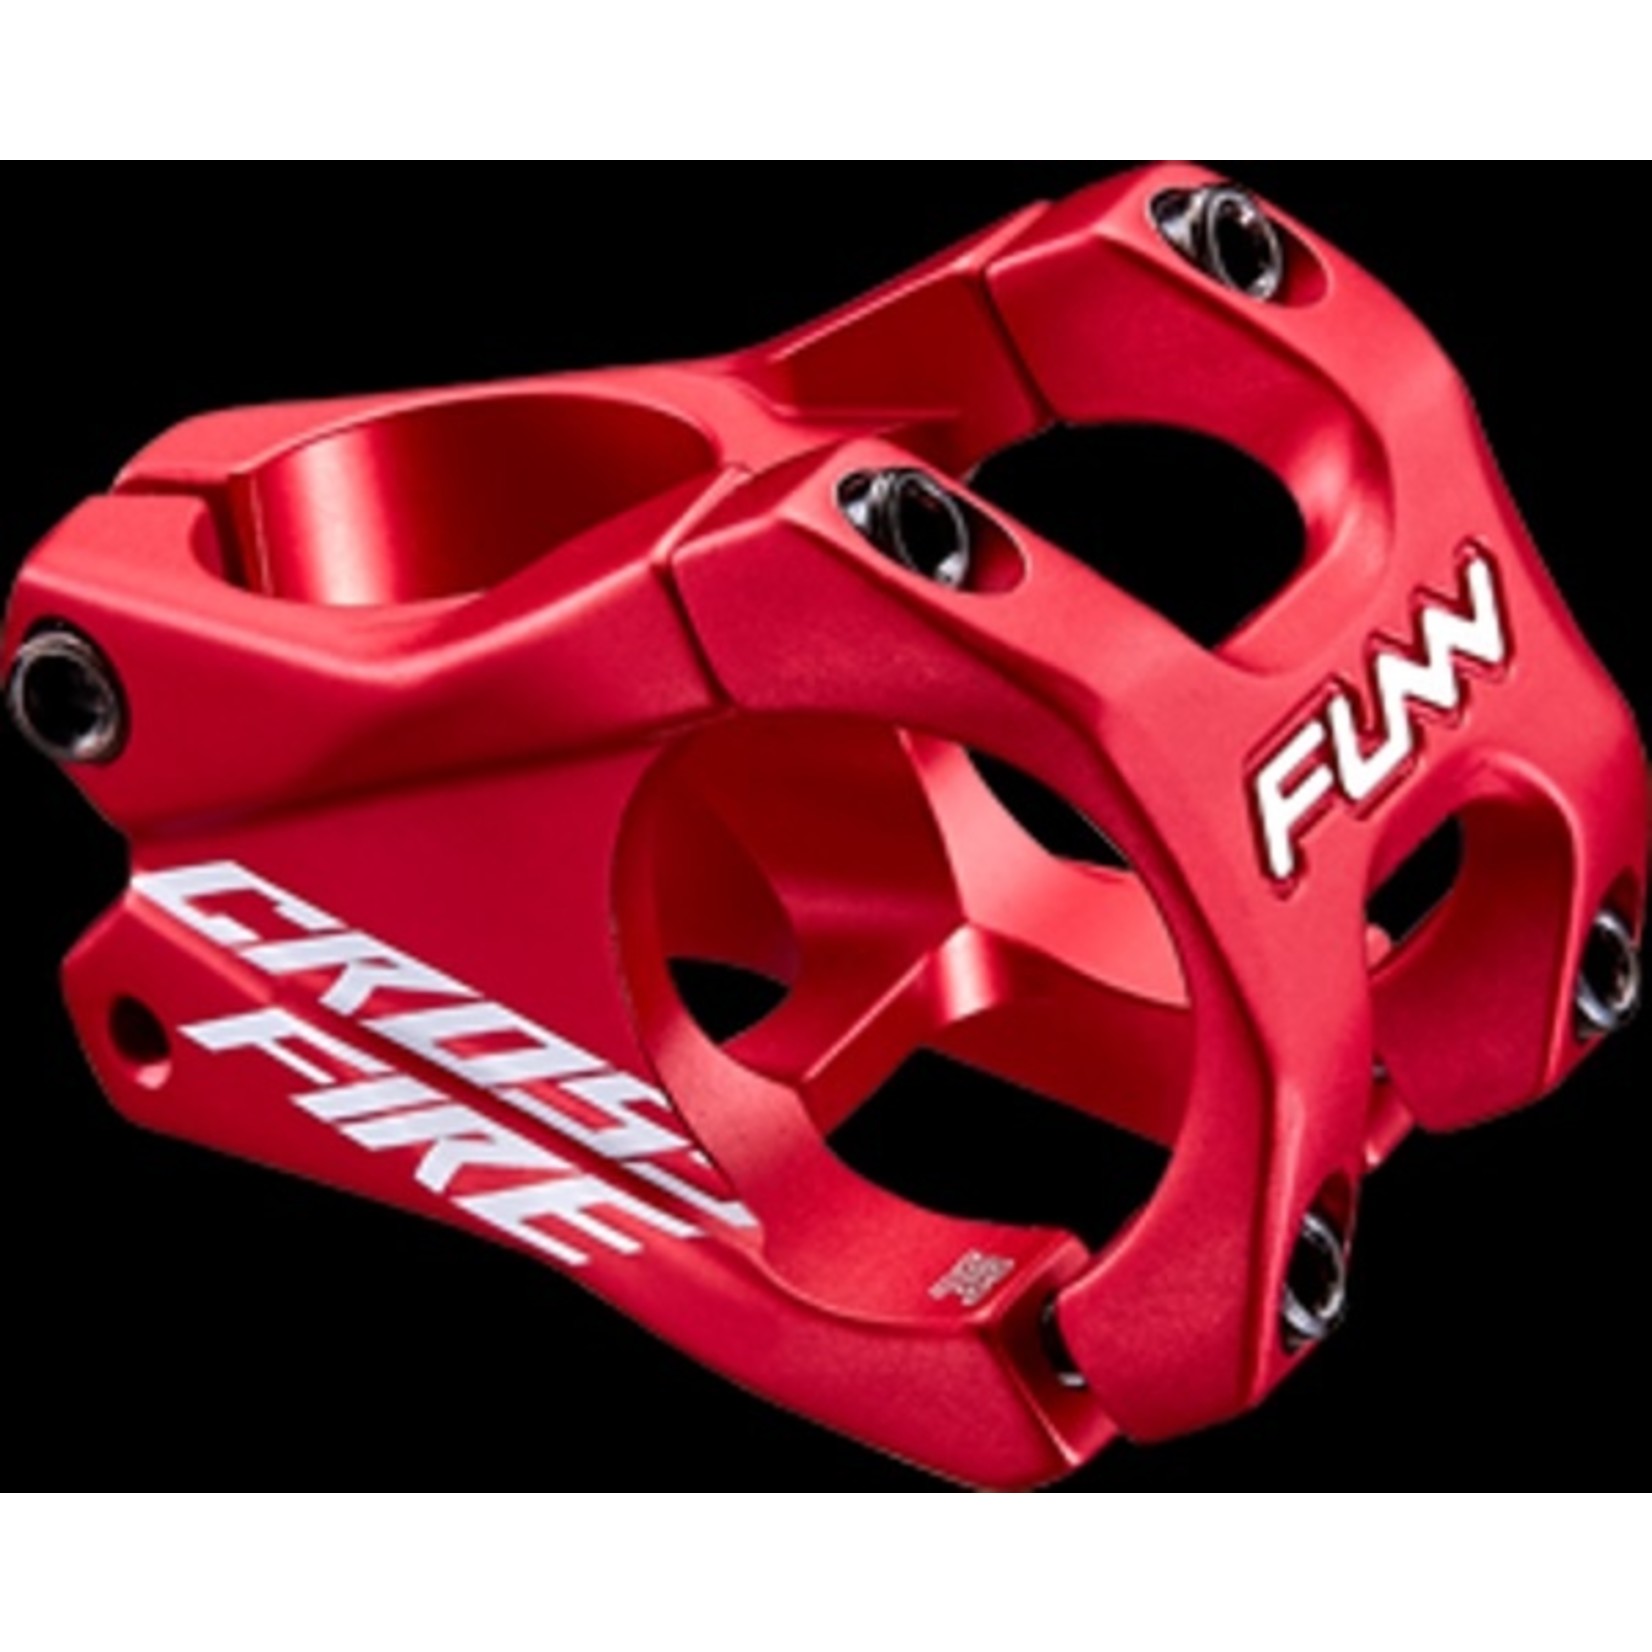 FUNN Funn Bicycle Stem - Crossfire - 31.8mm - 35mm - 0° Rise - Steer 1-1/8 Inch - Red